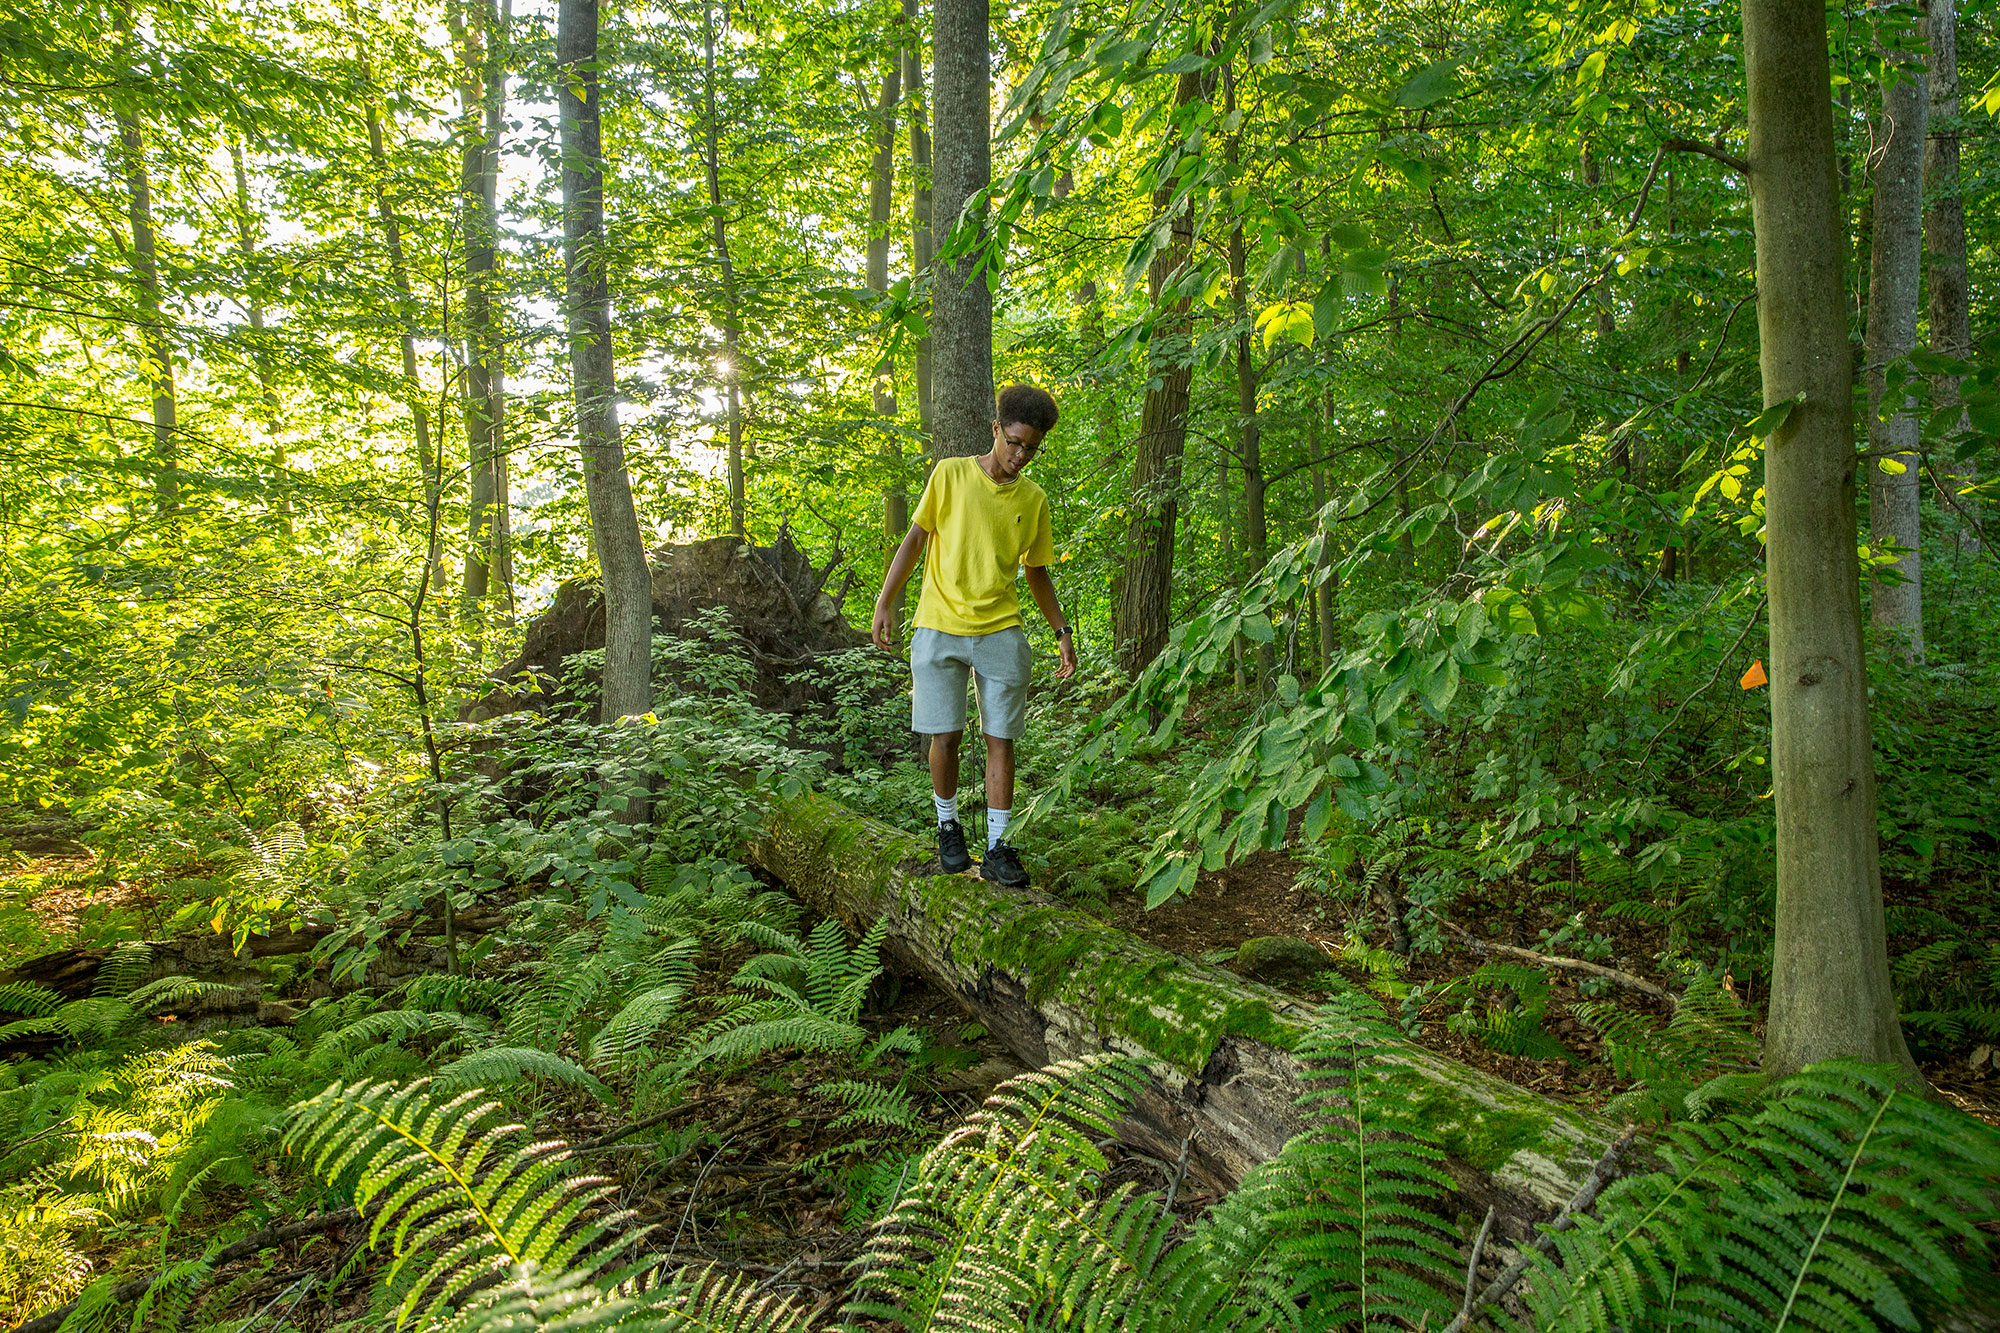 A young boy standing on a log in the woods.